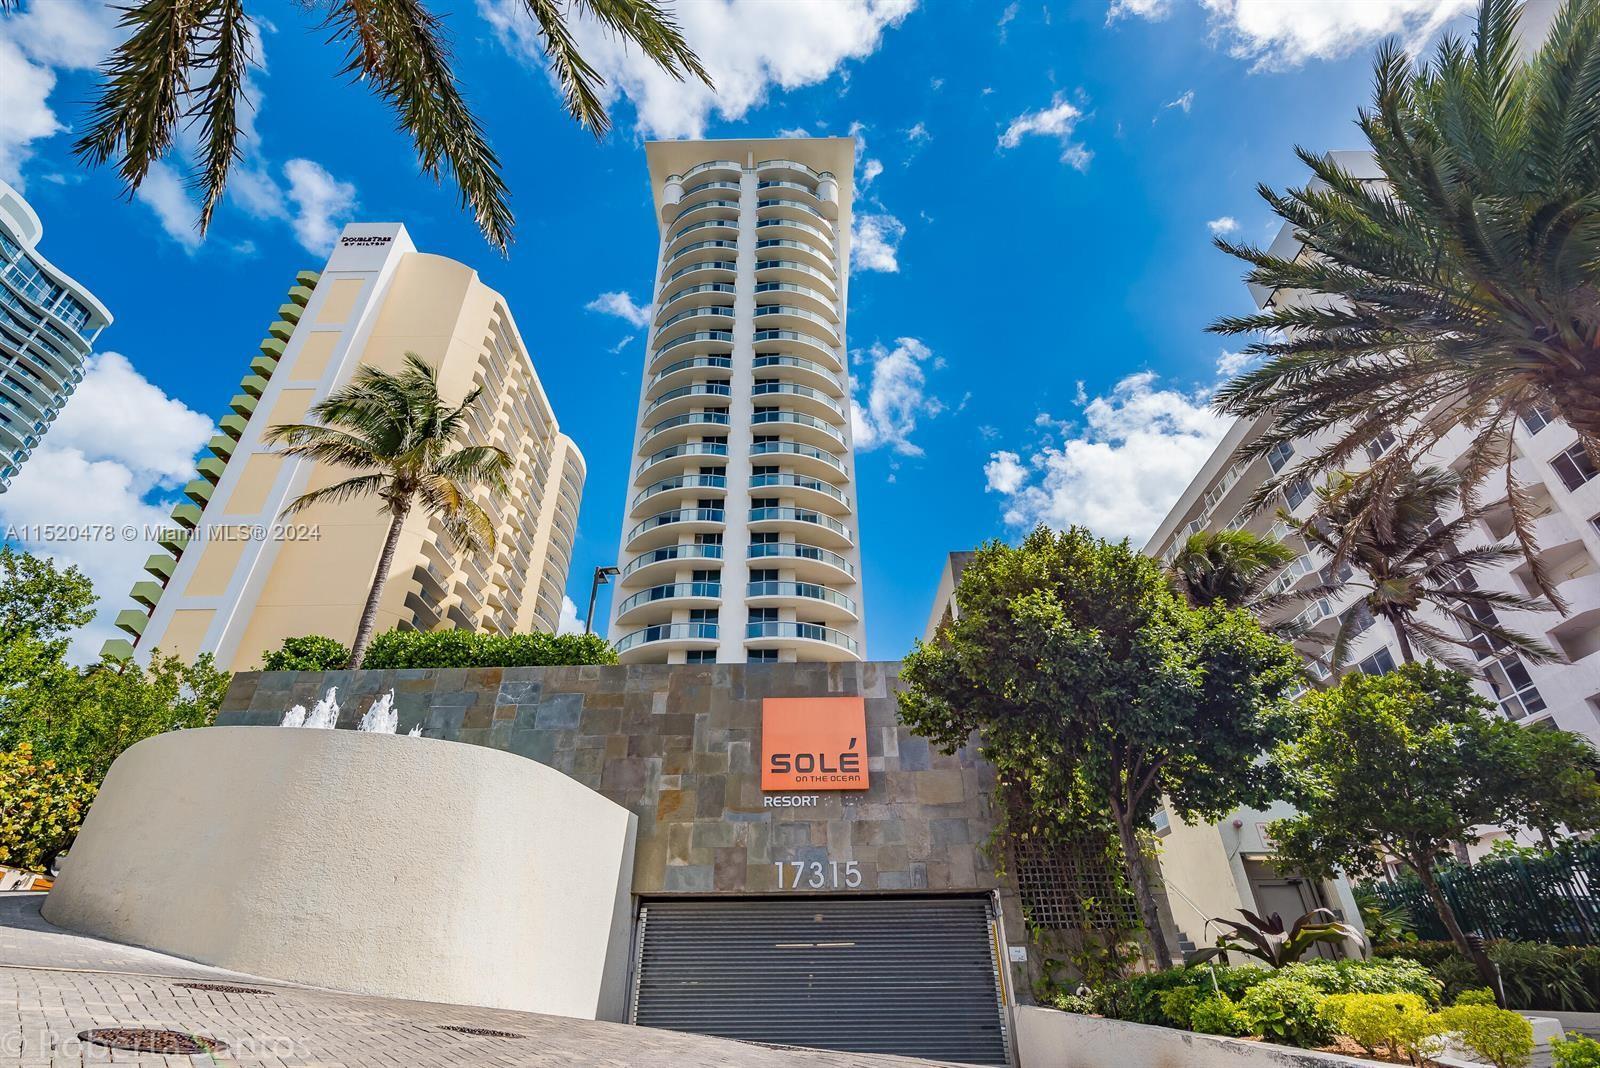 Photo of 17315 Collins Ave #1803 in Sunny Isles Beach, FL